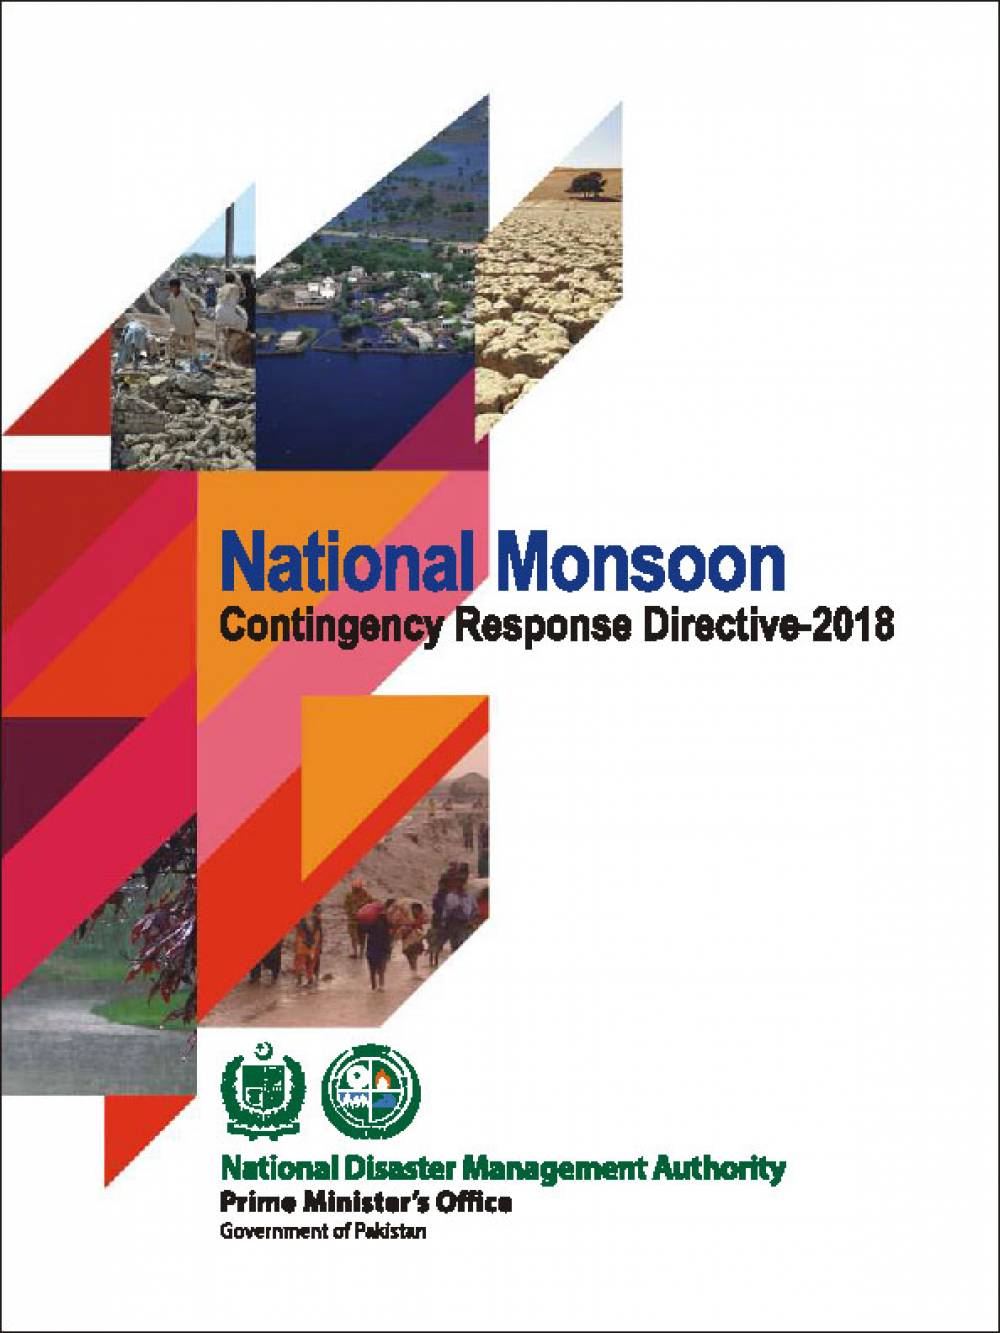 National Monsoon Contingency Response Directive 2018